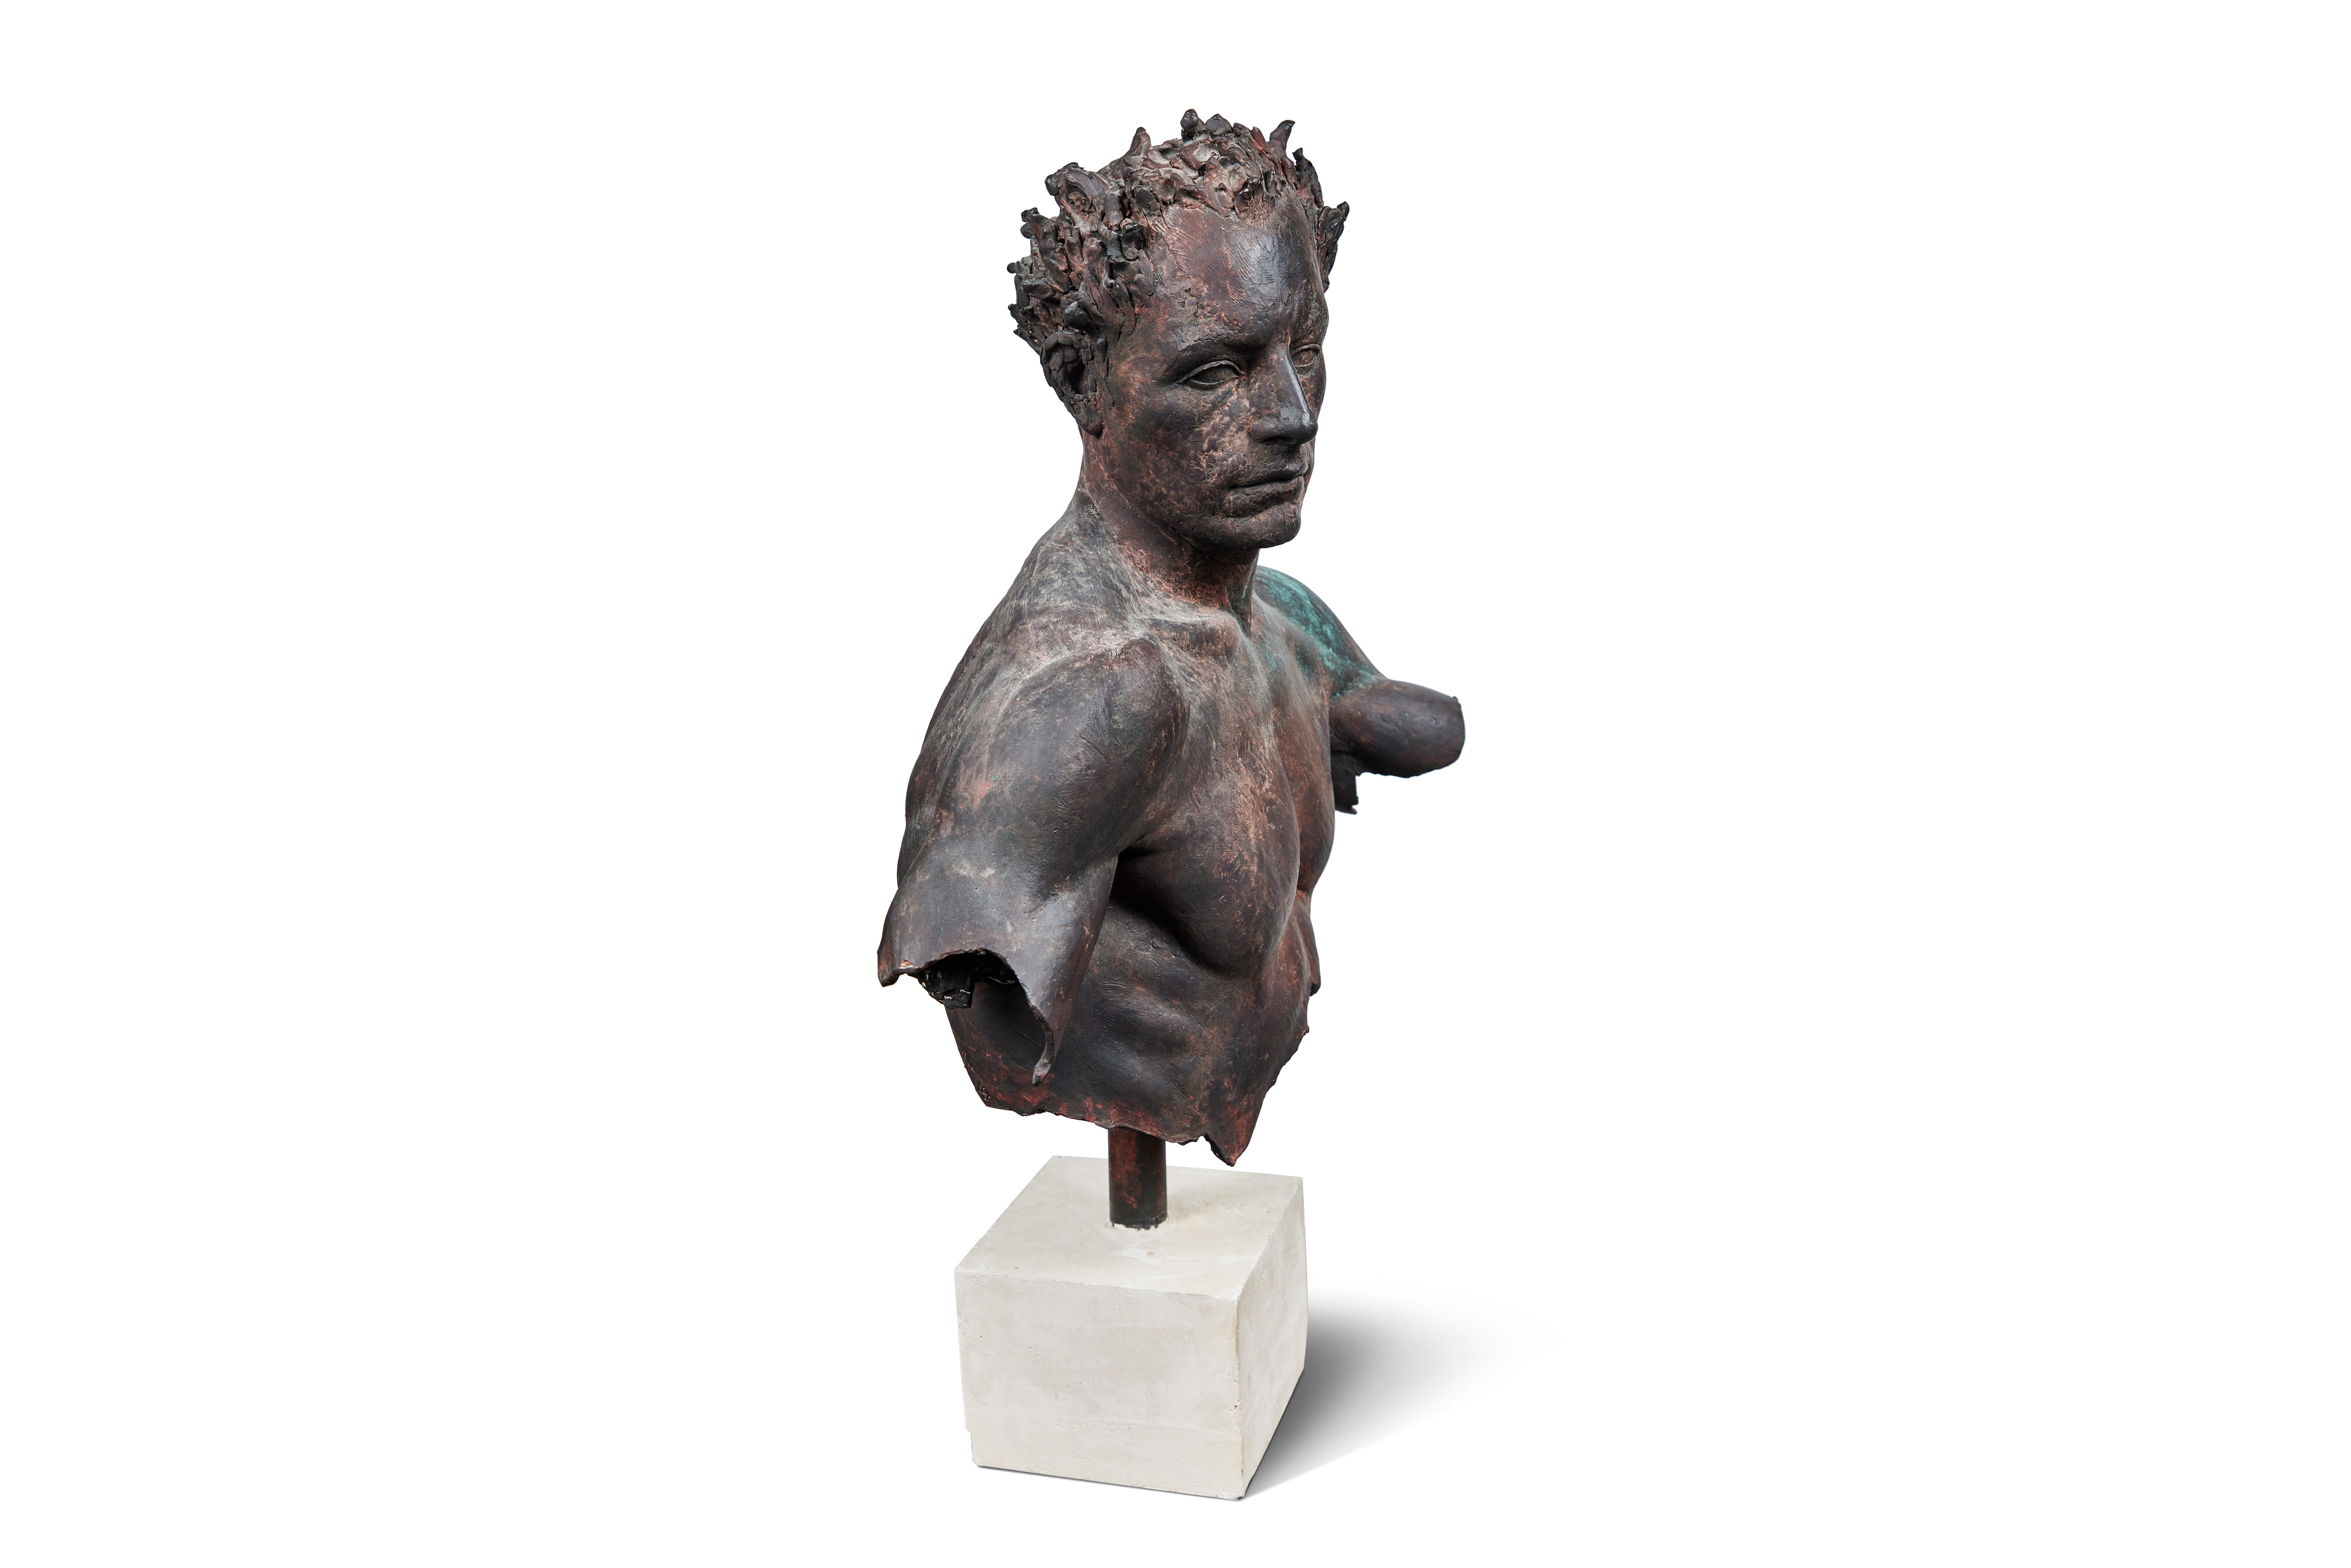 Bronze bust mounted on travertine marble base by Sabin Howard, 2005. Signed, numbered 7/12.
Sabin Howard is a classical figurative sculptor based in New York City with a studio in the Bronx. he is a board member of the national Sculpture Society.